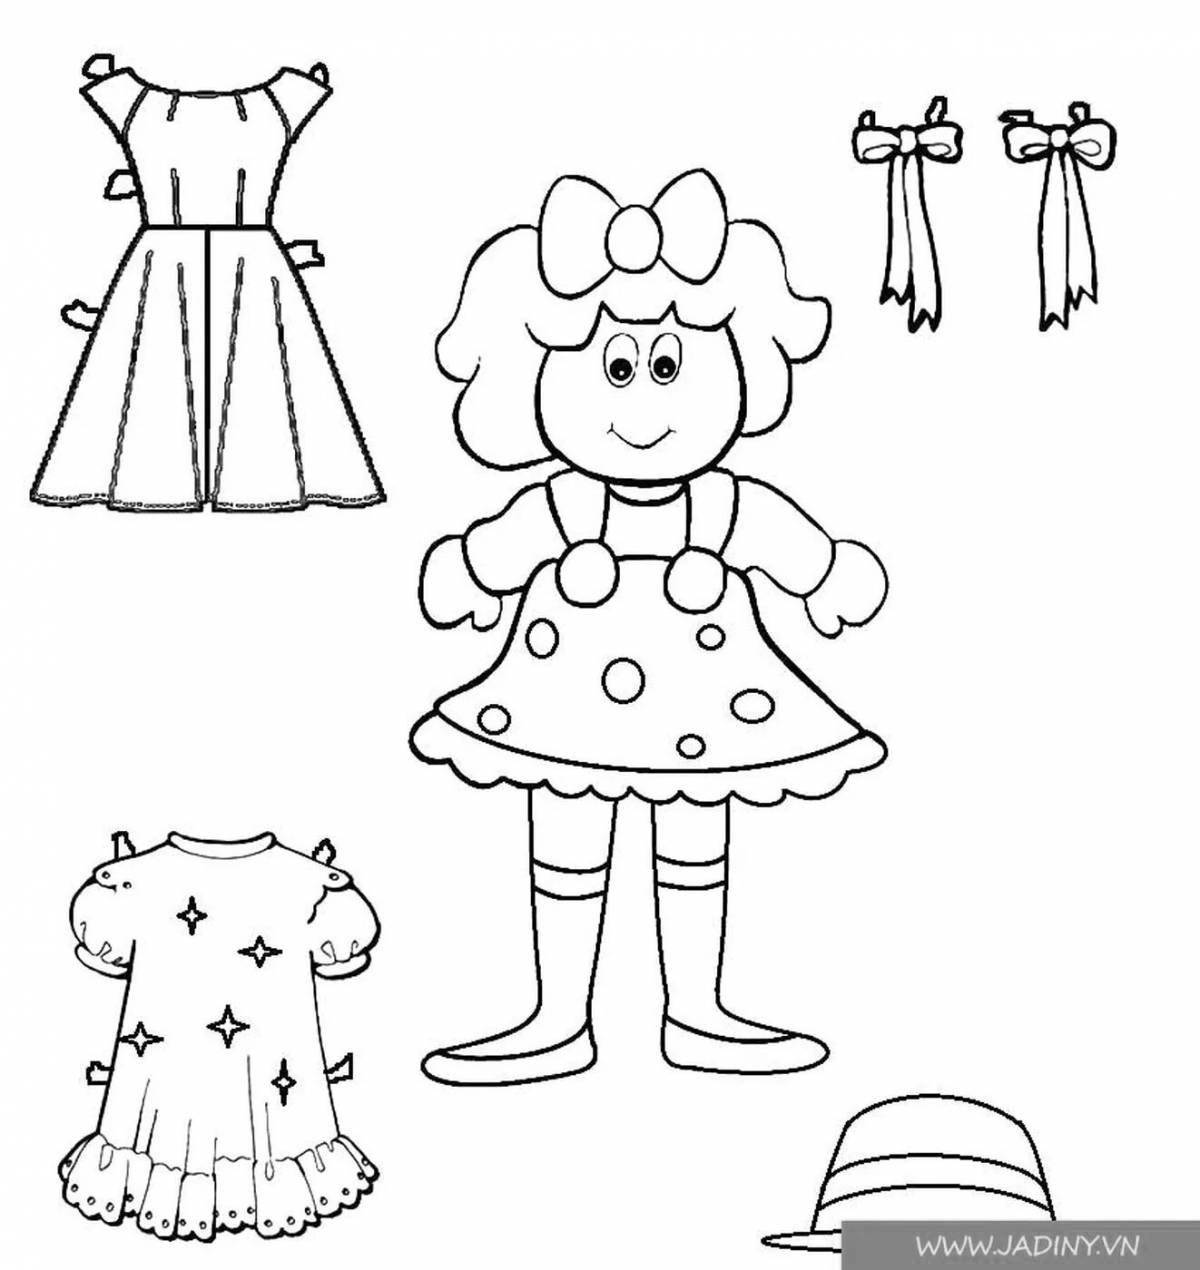 Fairy doll dress coloring book for children 3-4 years old